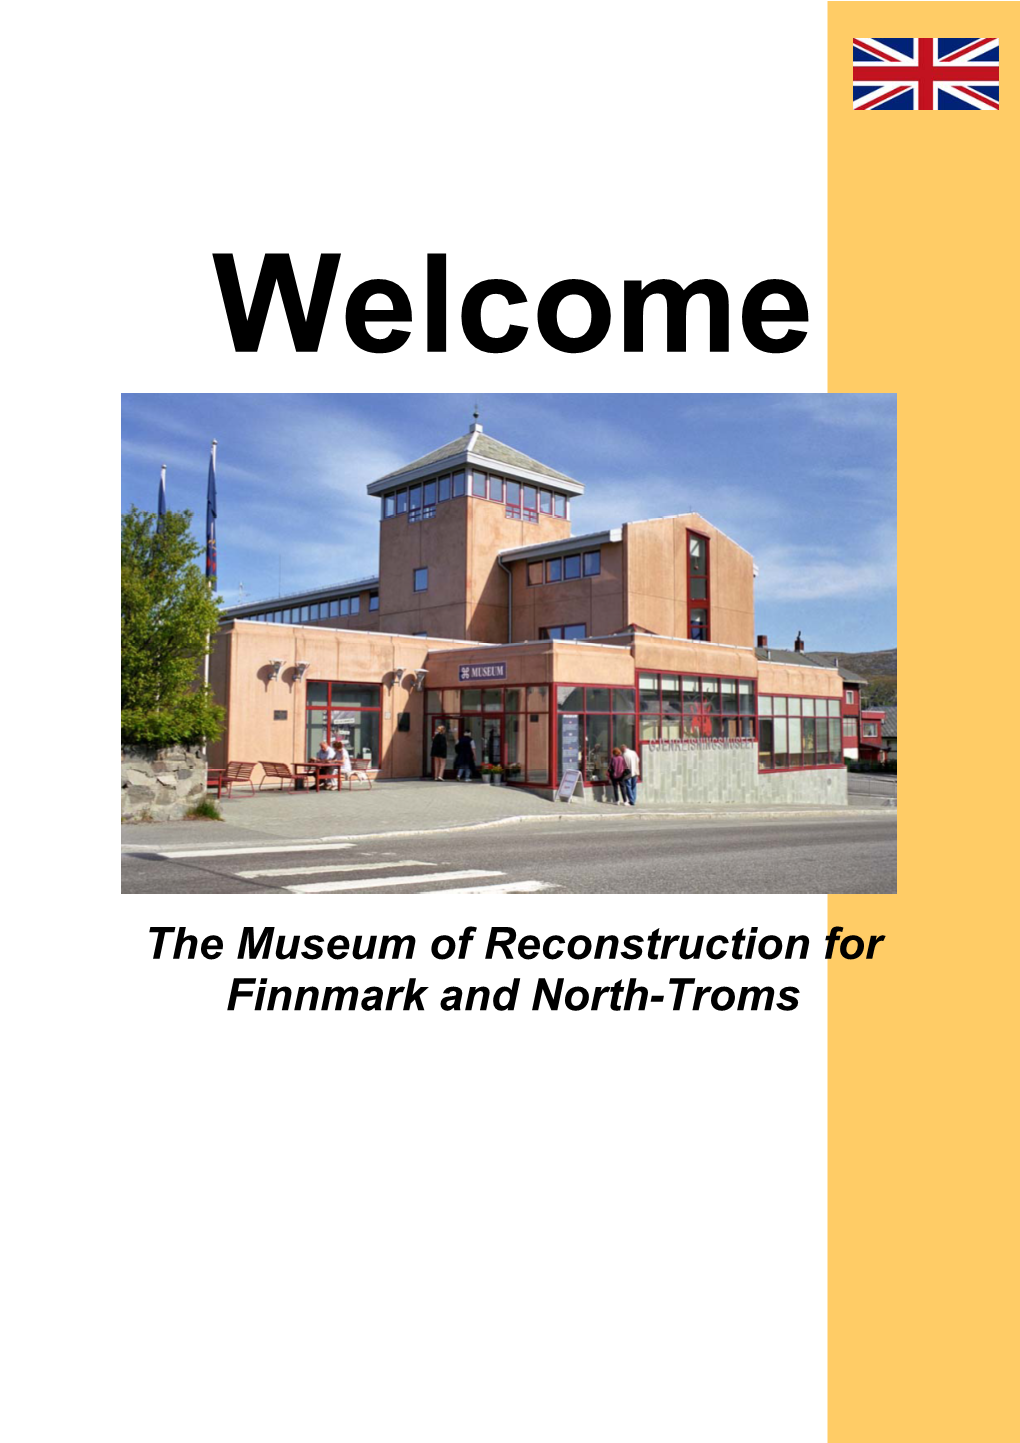 The Museum of Reconstruction for Finnmark and North-Troms